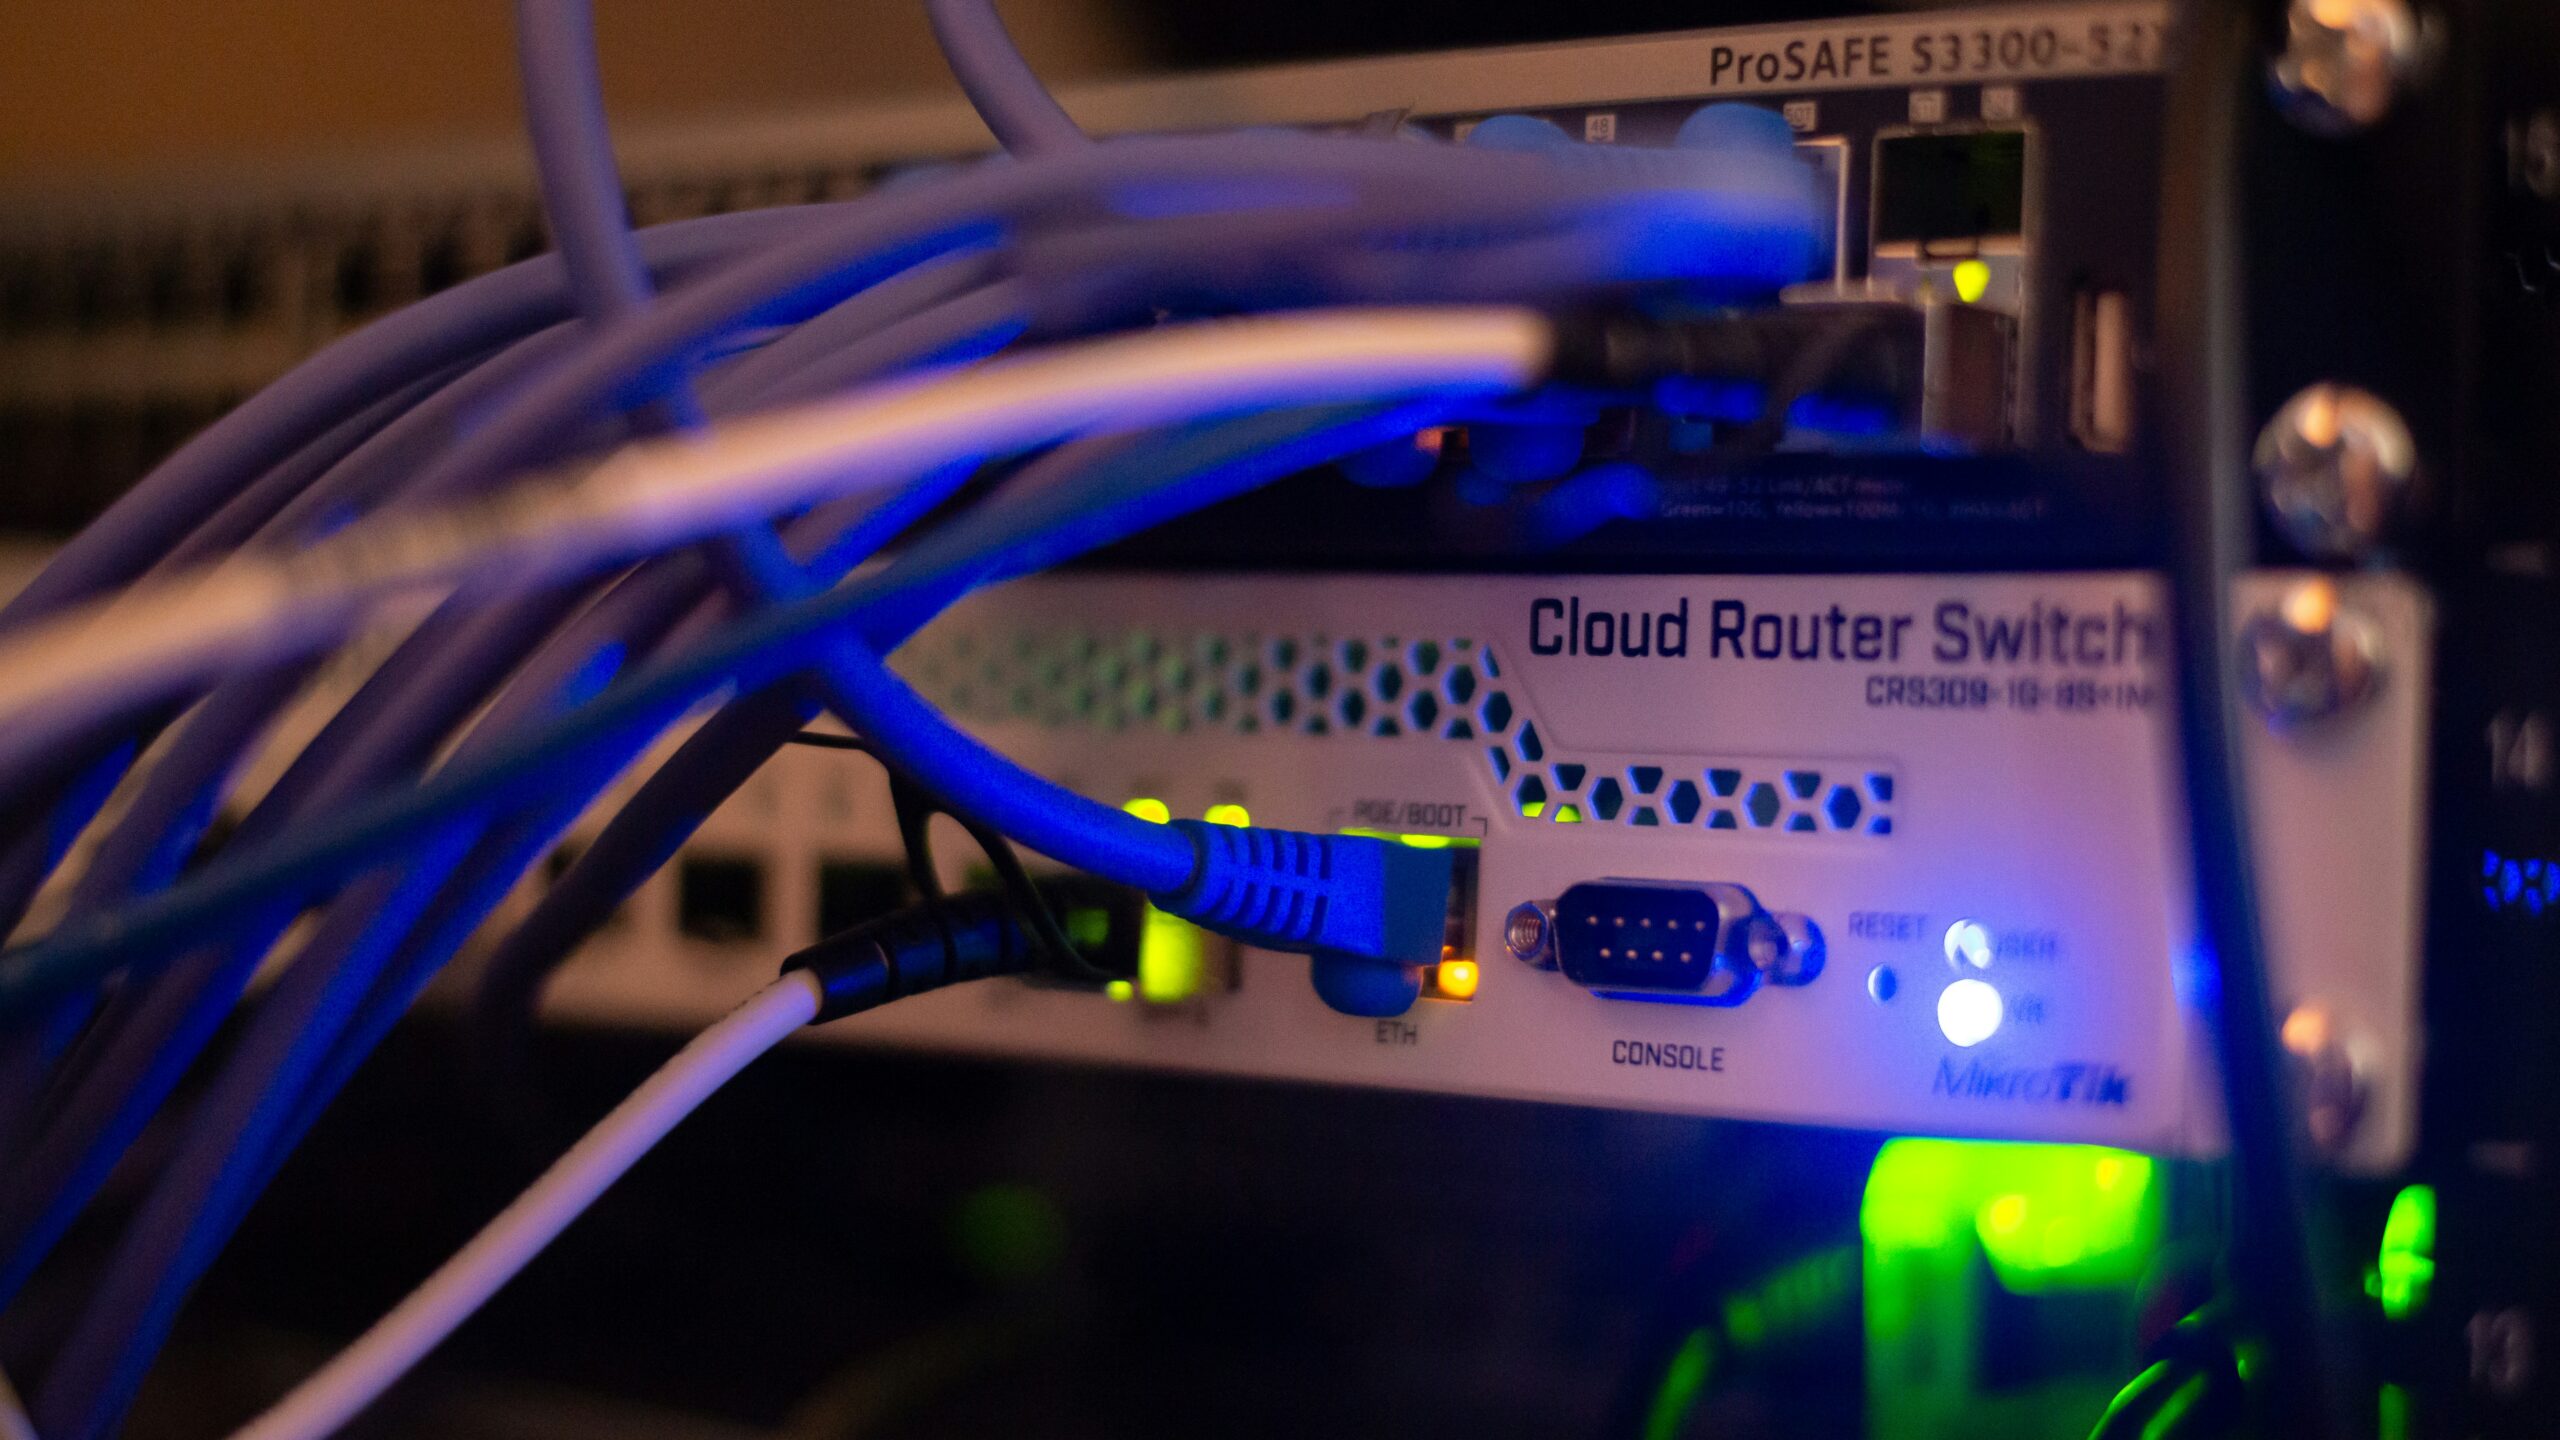 Cloud router that is managed by external tech provider, which is an example of a MSP service.